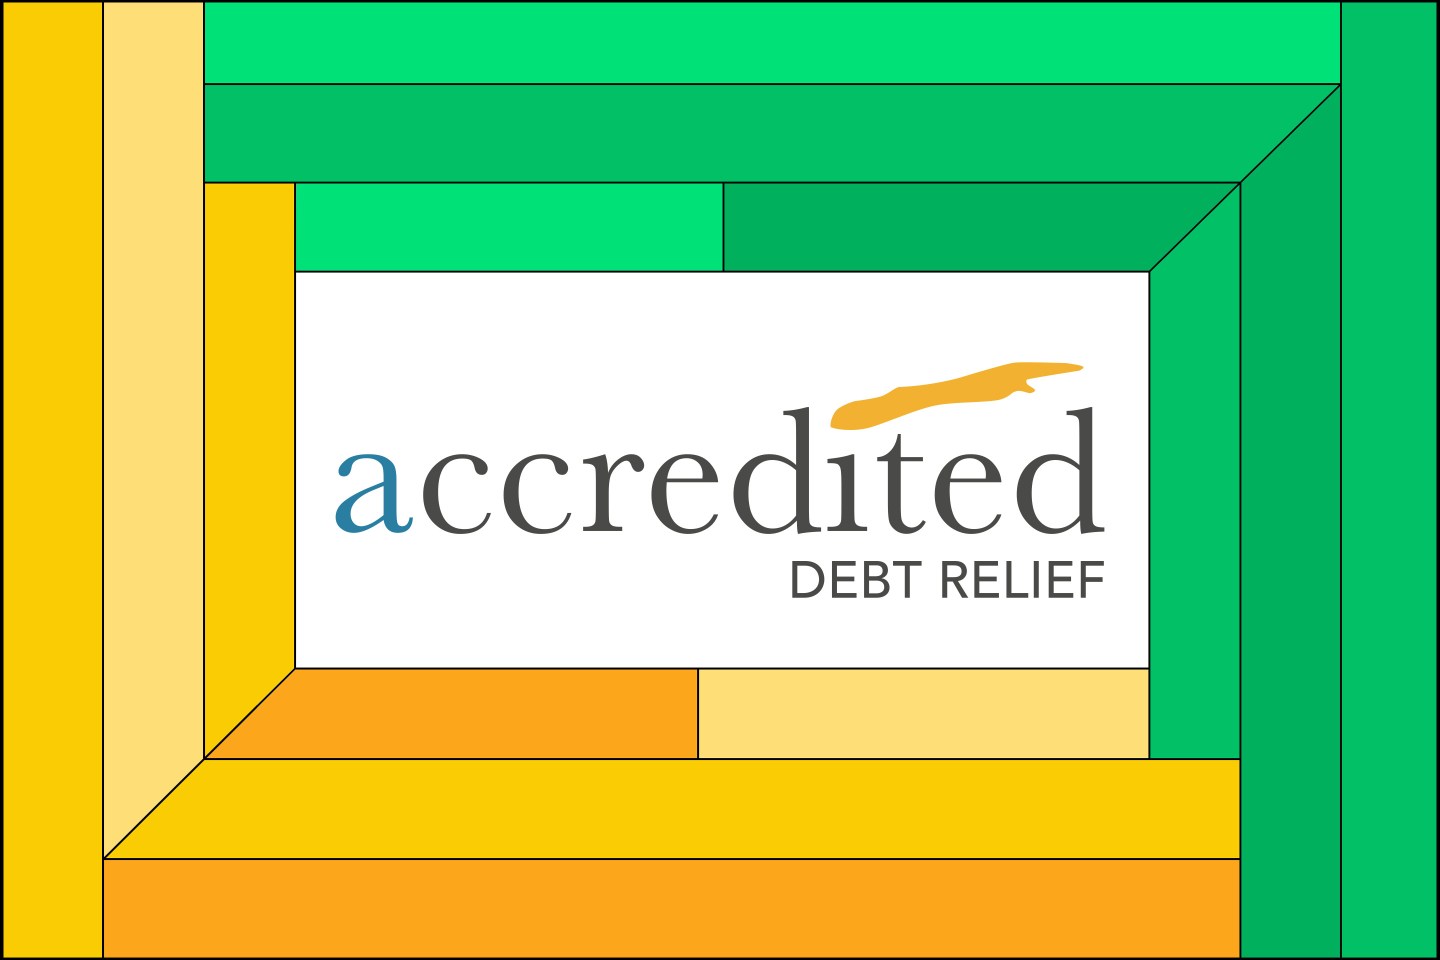 Illustration of the Accredited Debt logo inside a yellow and green frame.